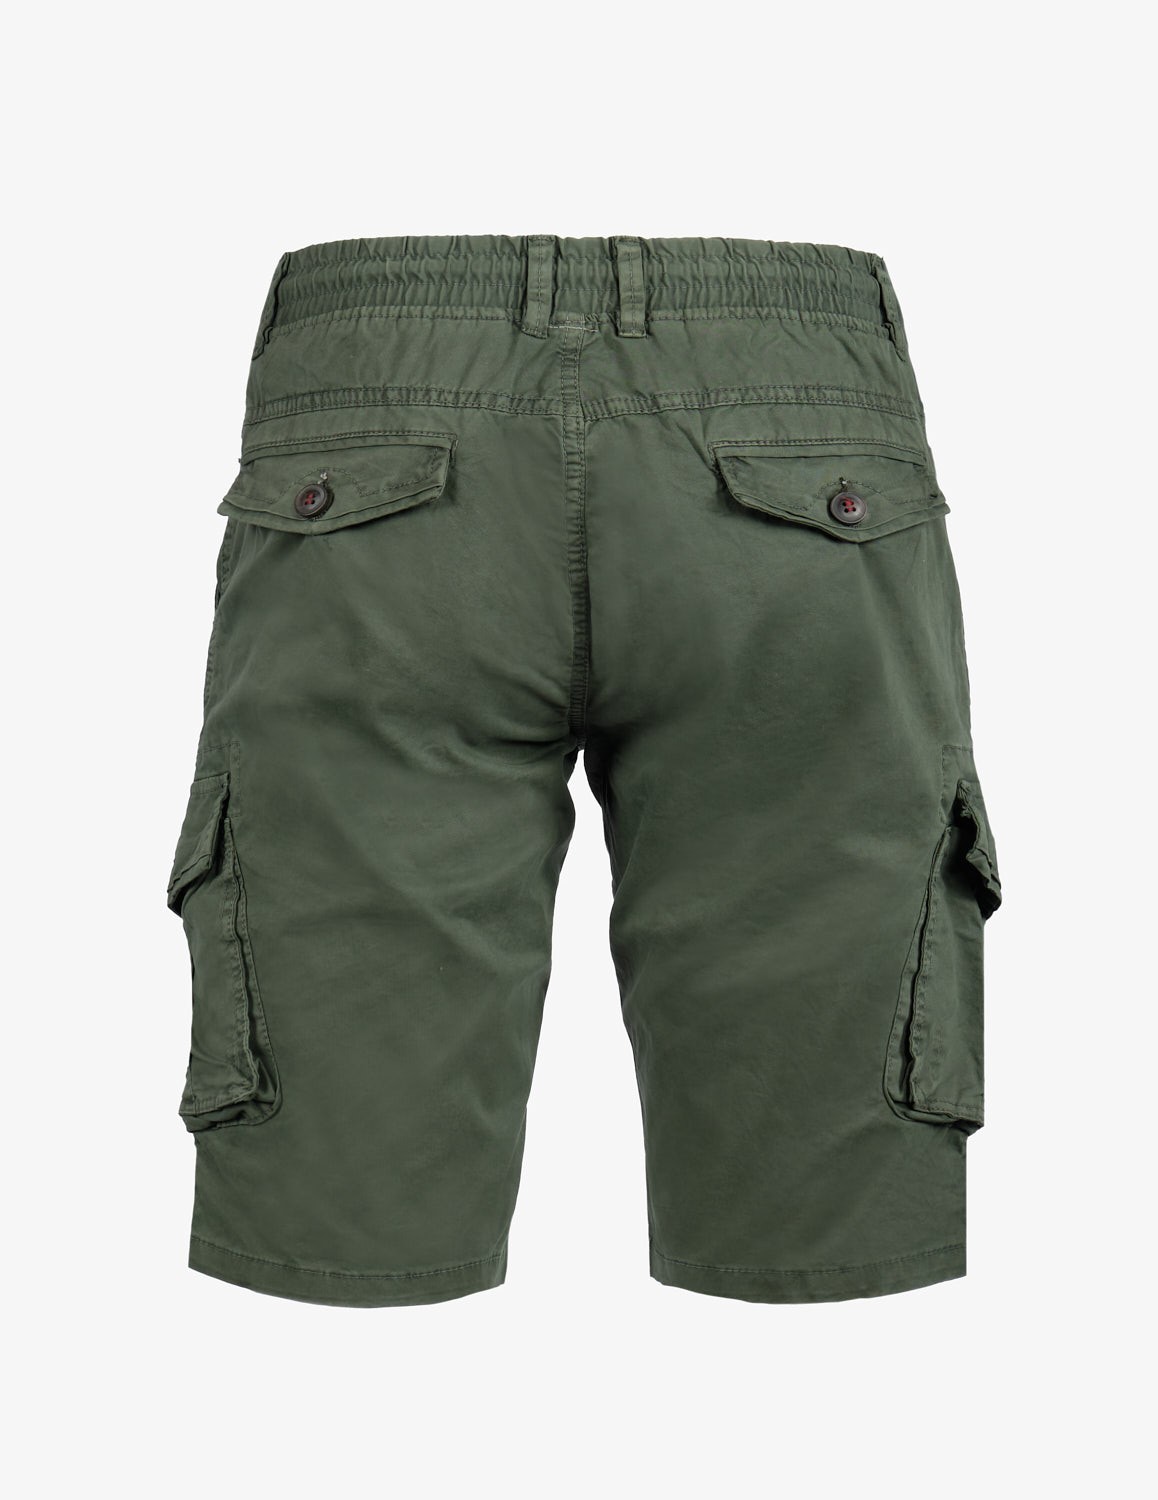 Soldier Shorts Army Green